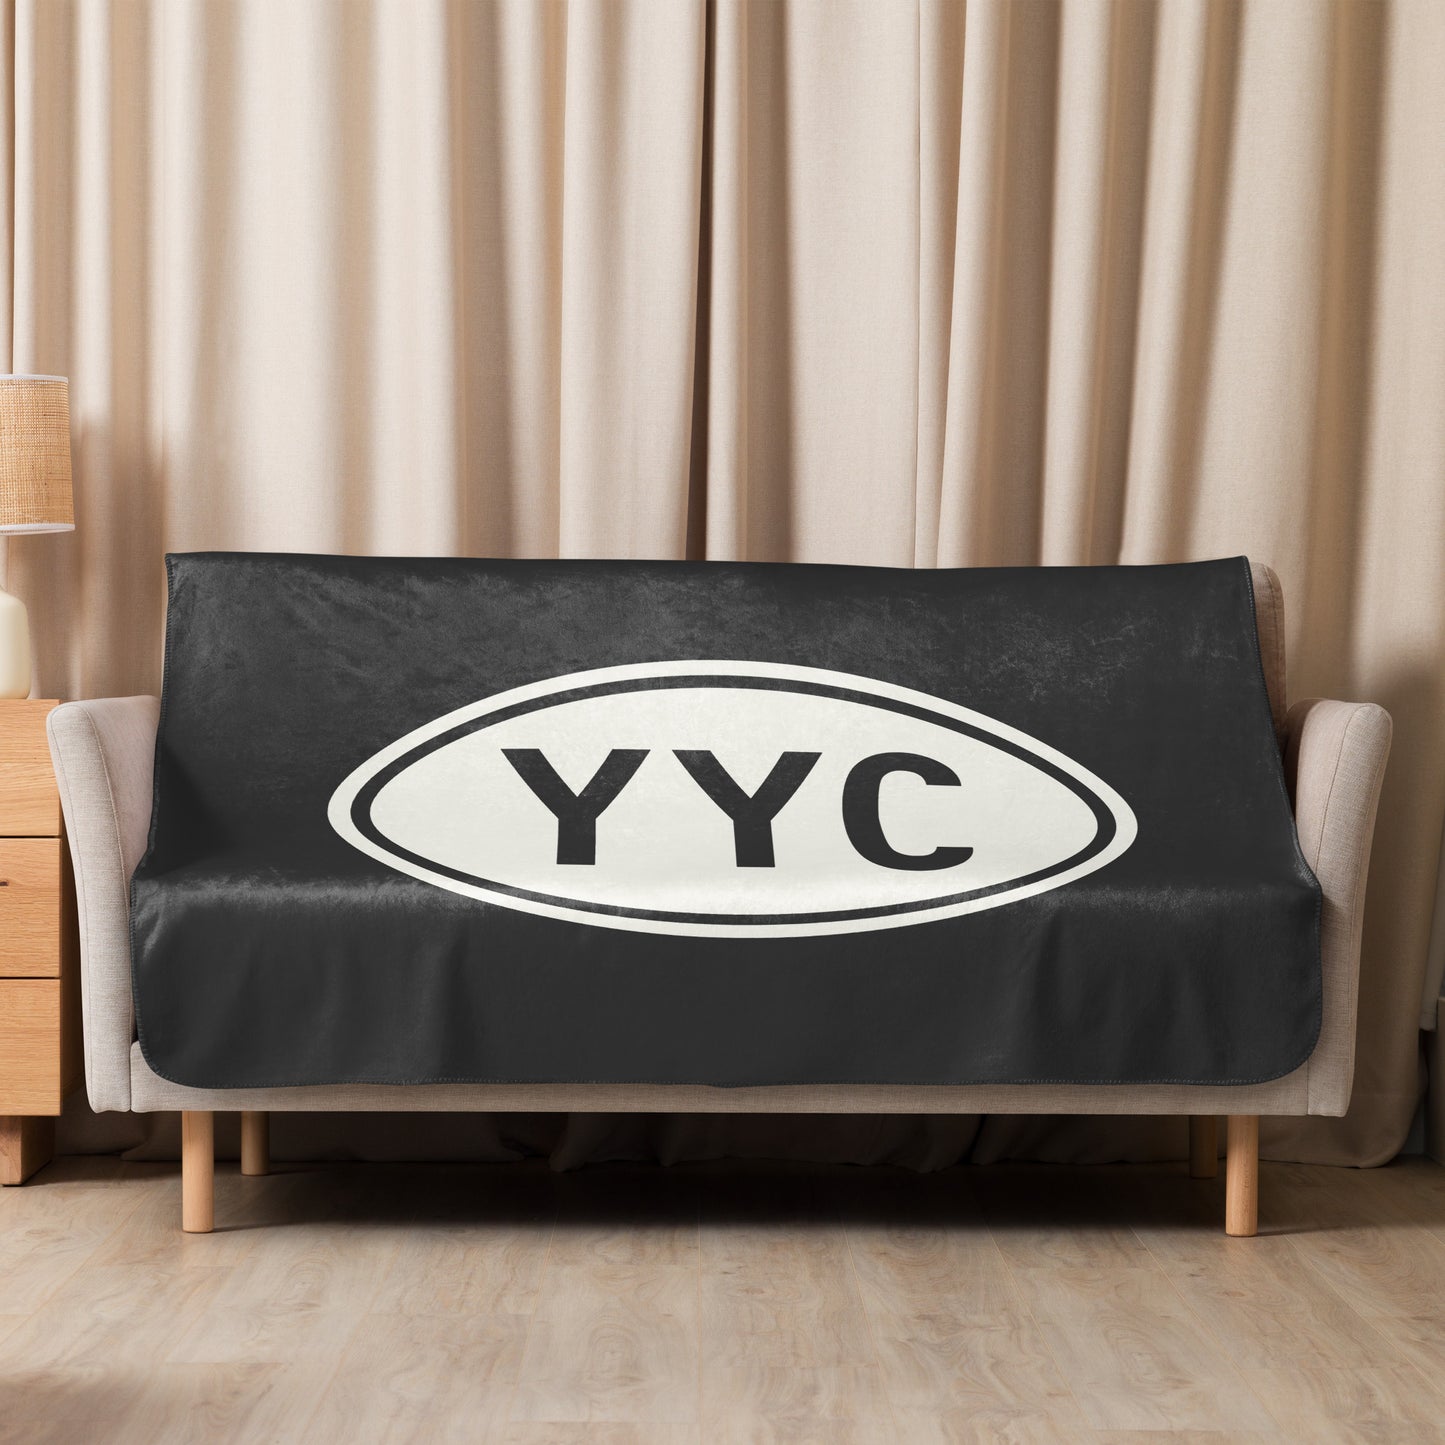 Unique Travel Gift Sherpa Blanket - White Oval • YYC Calgary • YHM Designs - Image 07